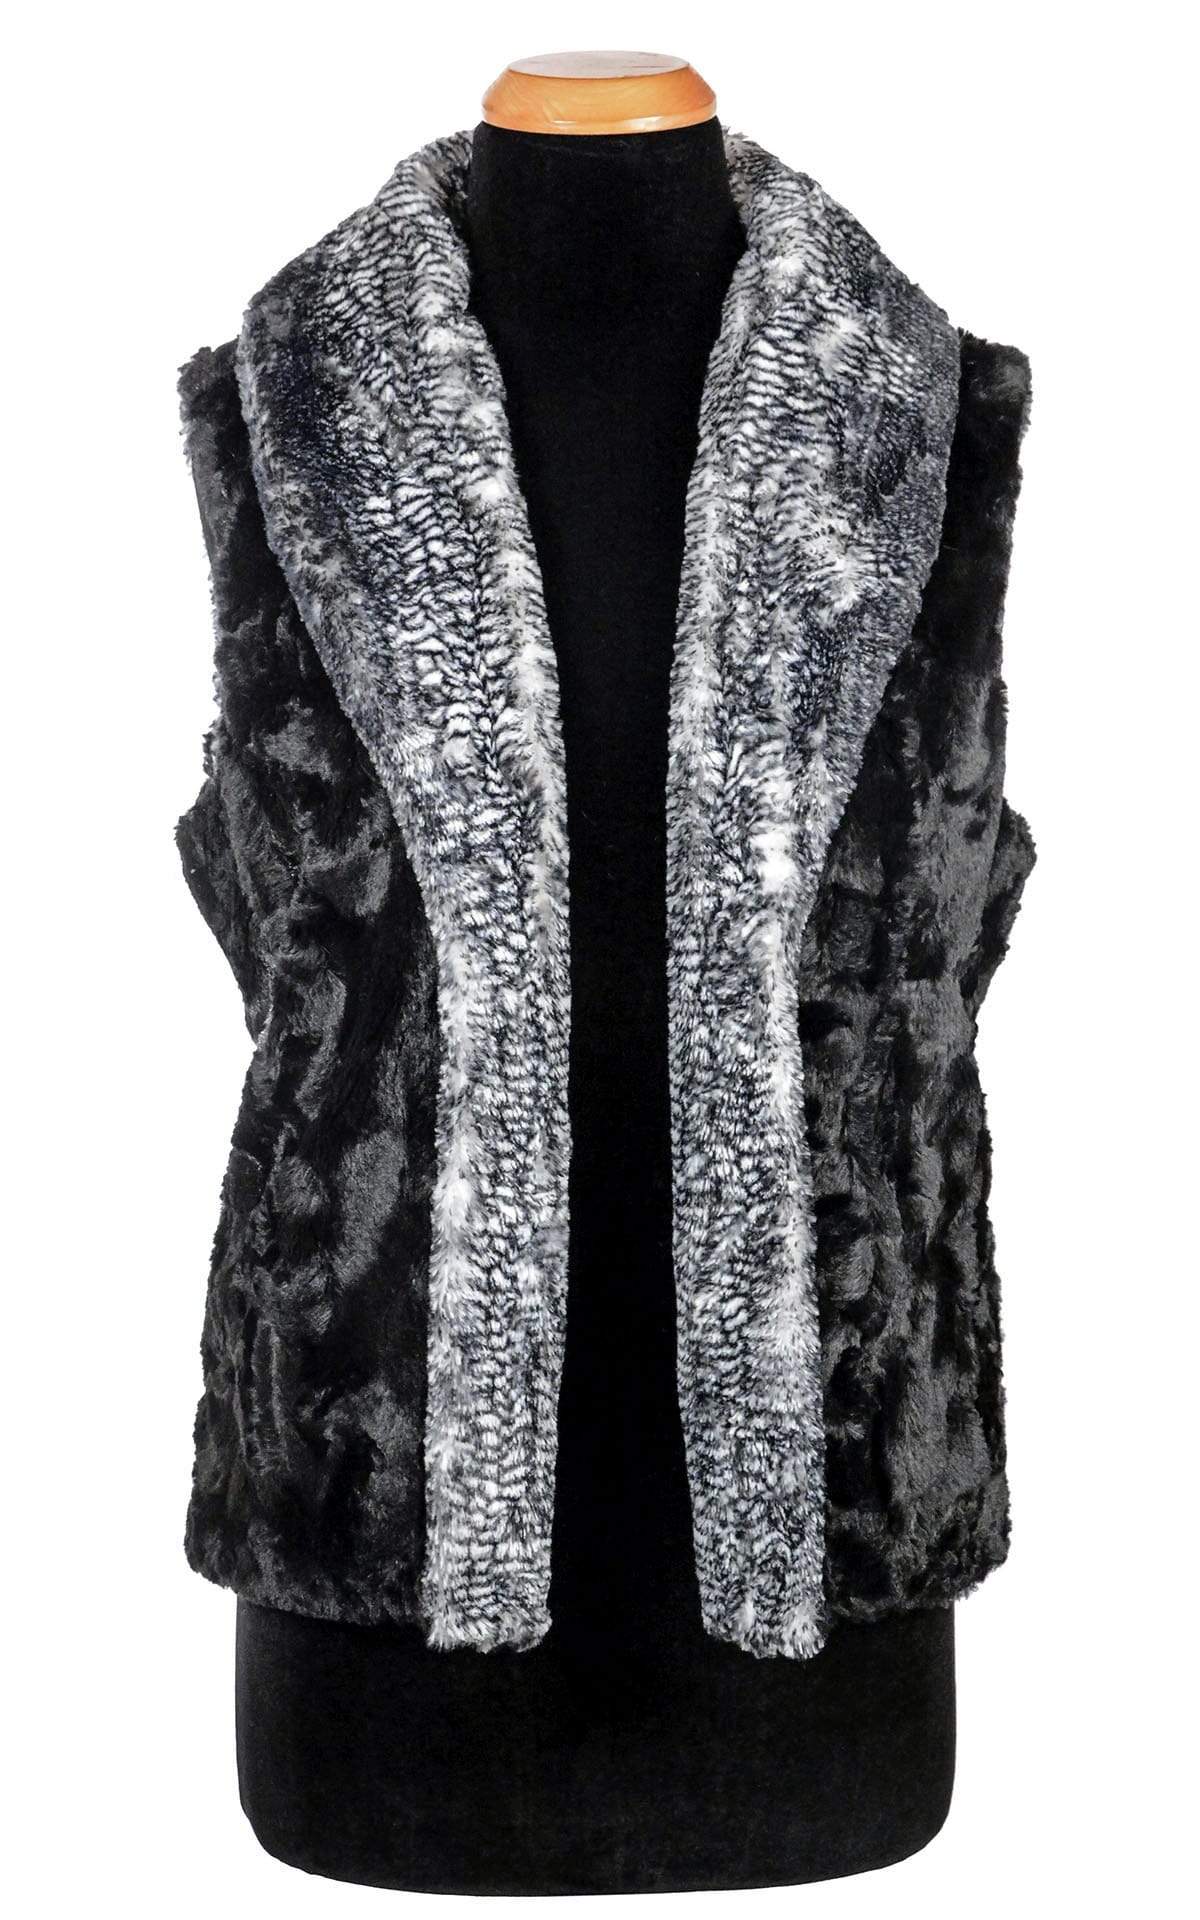 Open View of Shawl Collar Vest, Reversed | Black Mamba Black and White Faux Fur with Cuddly Faux Fur in Black | By Pandemonium Millinery | Seattle WA USA